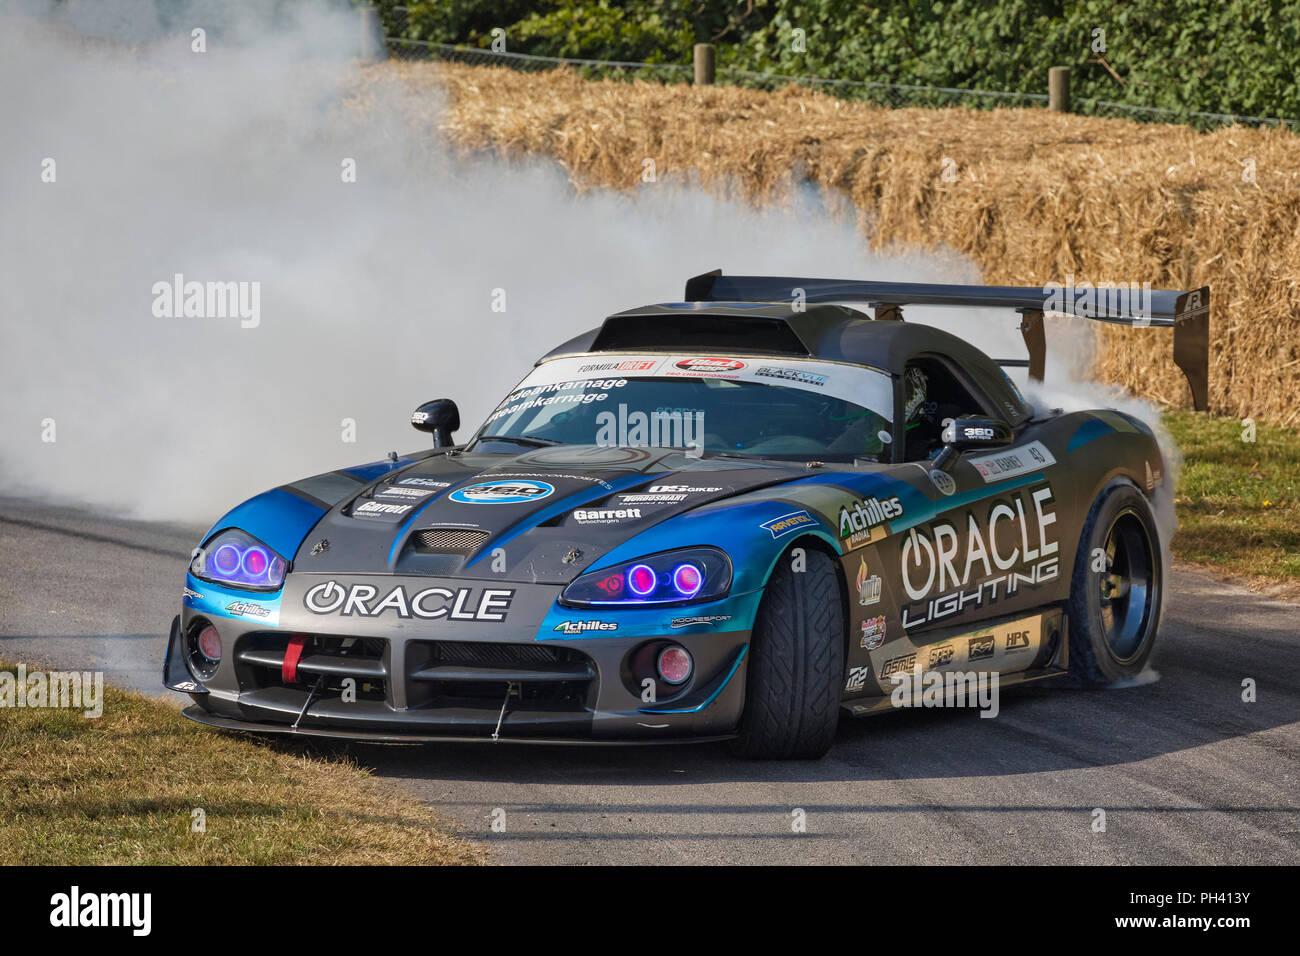 Mazda RX8 LS3 - Drift cars for sale 